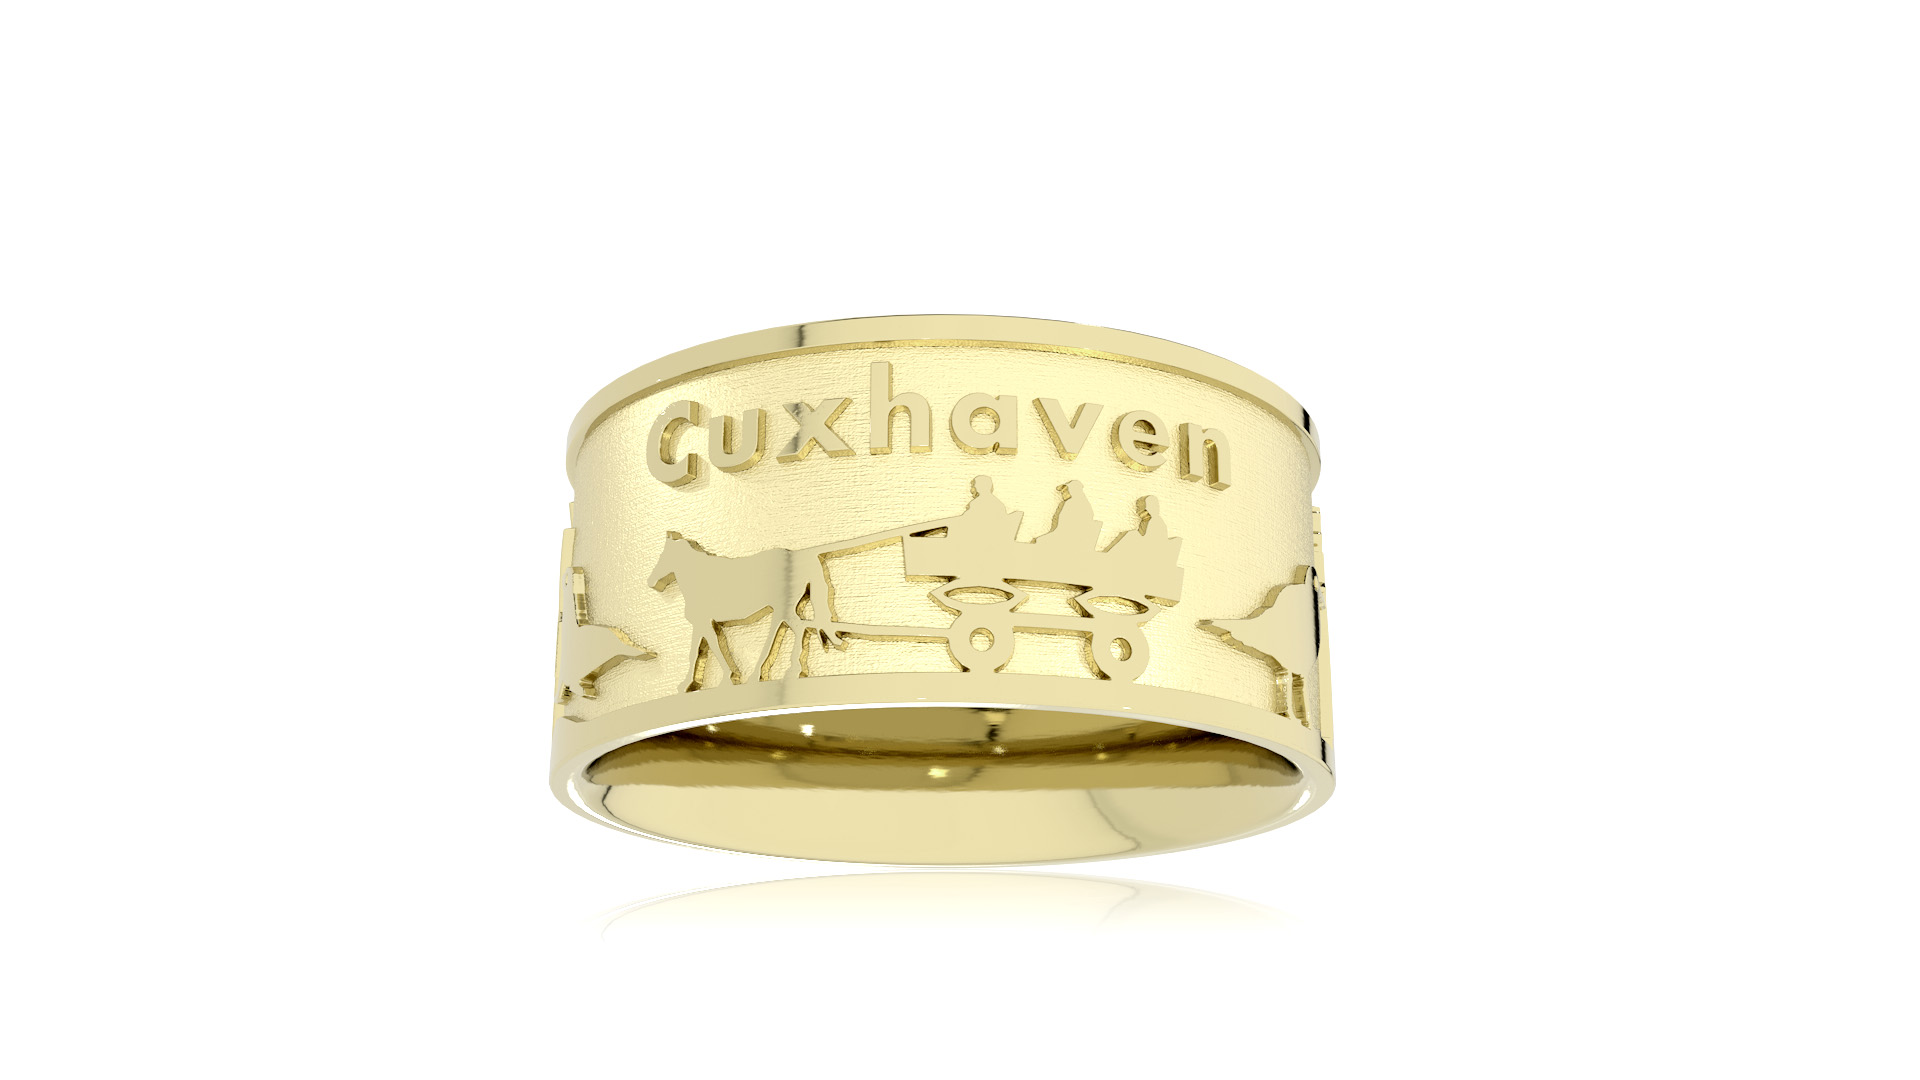 Ring Stadt Cuxhaven 585 Gelbgold